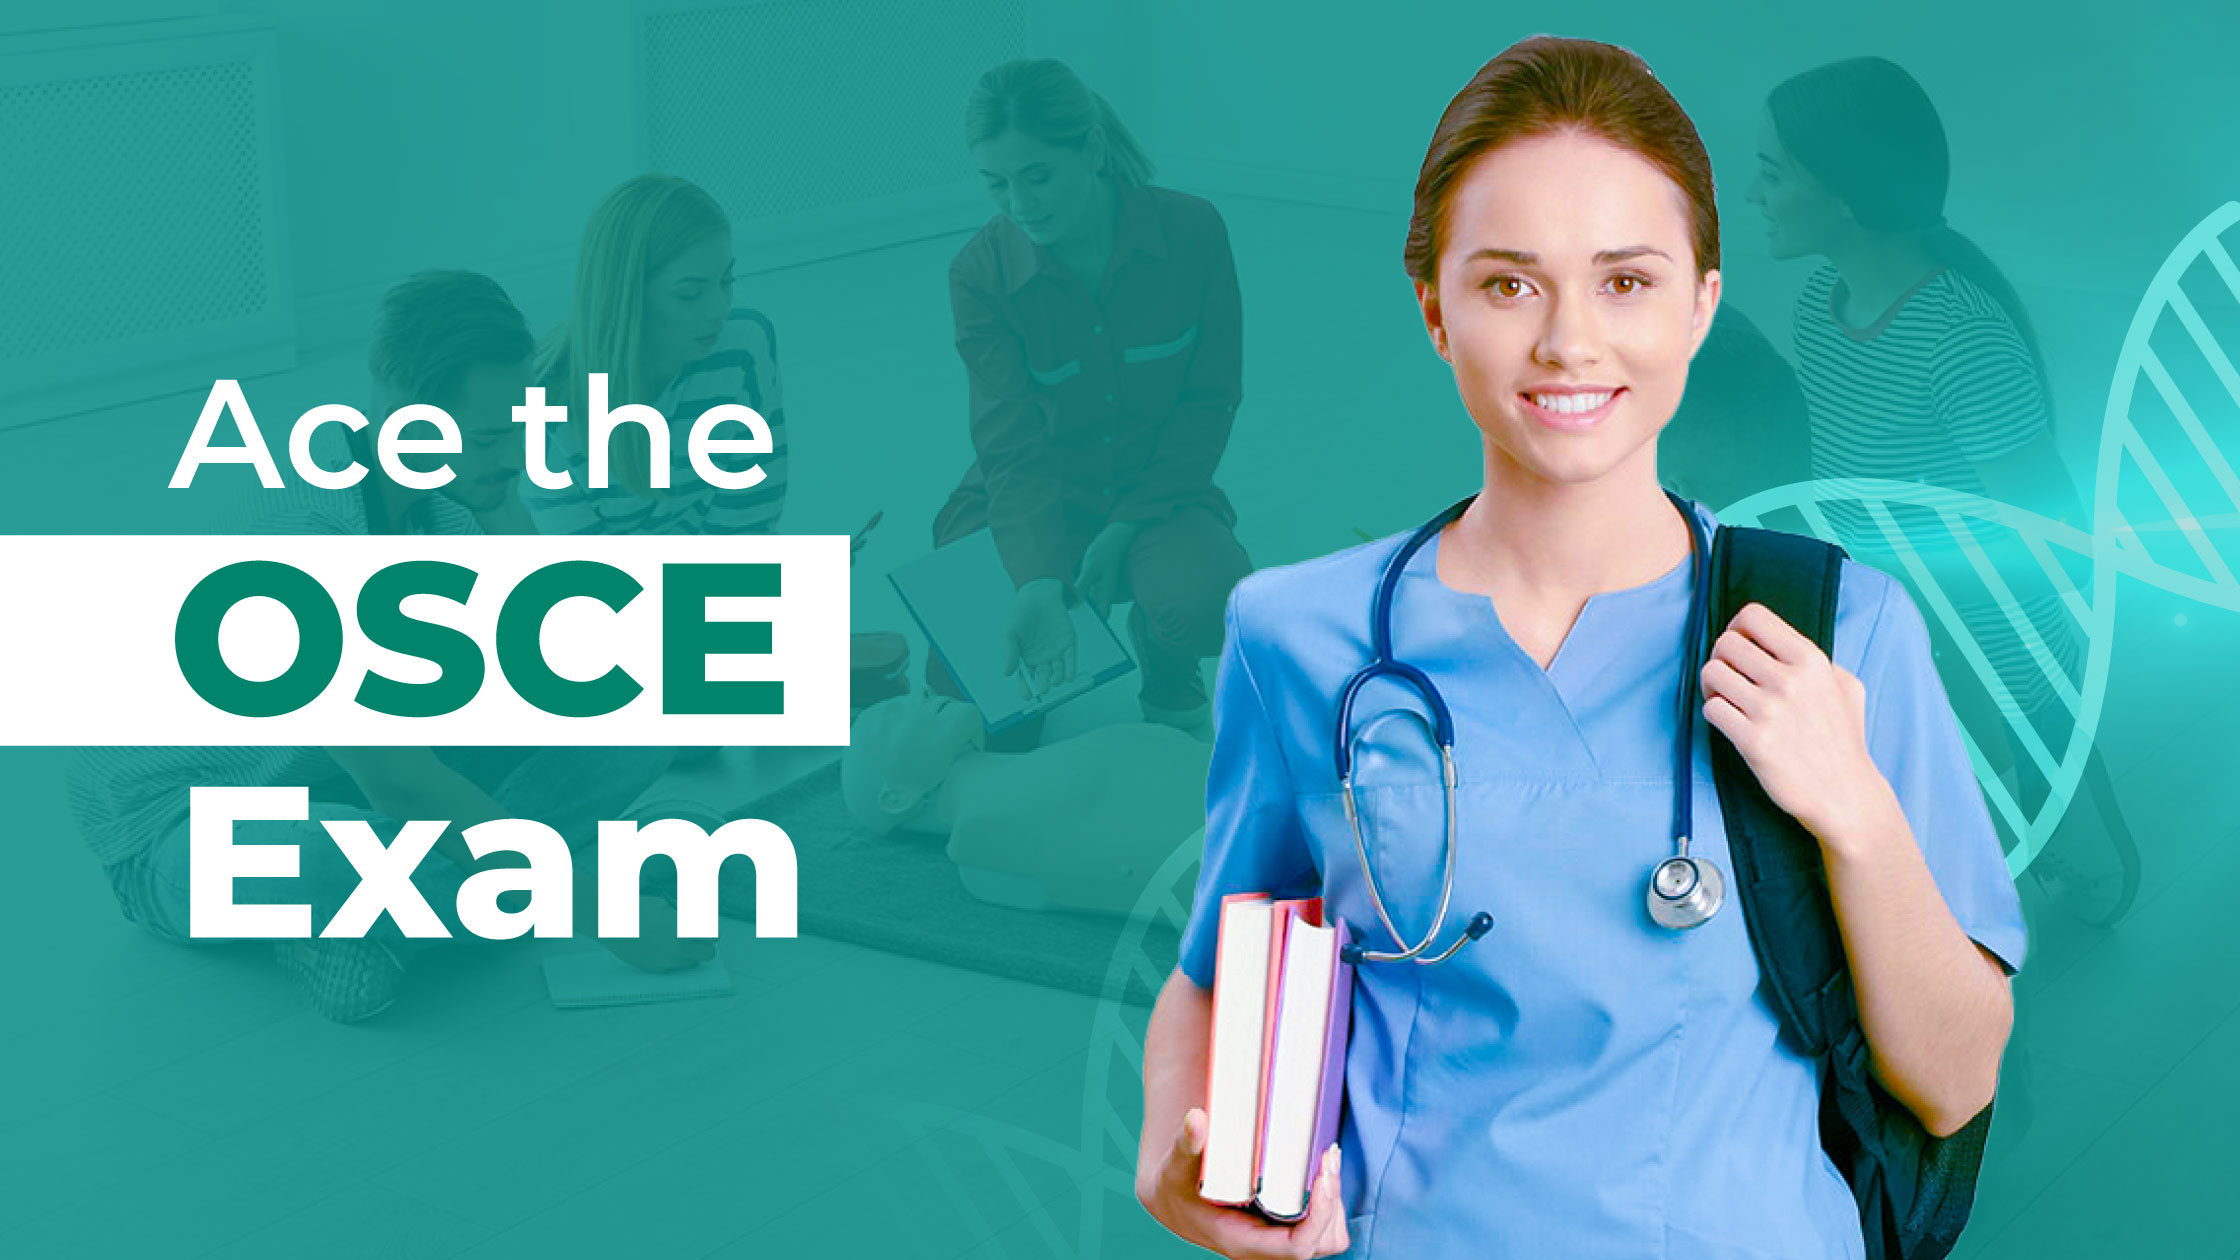 What Is OSCE Exam in the United Kingdom